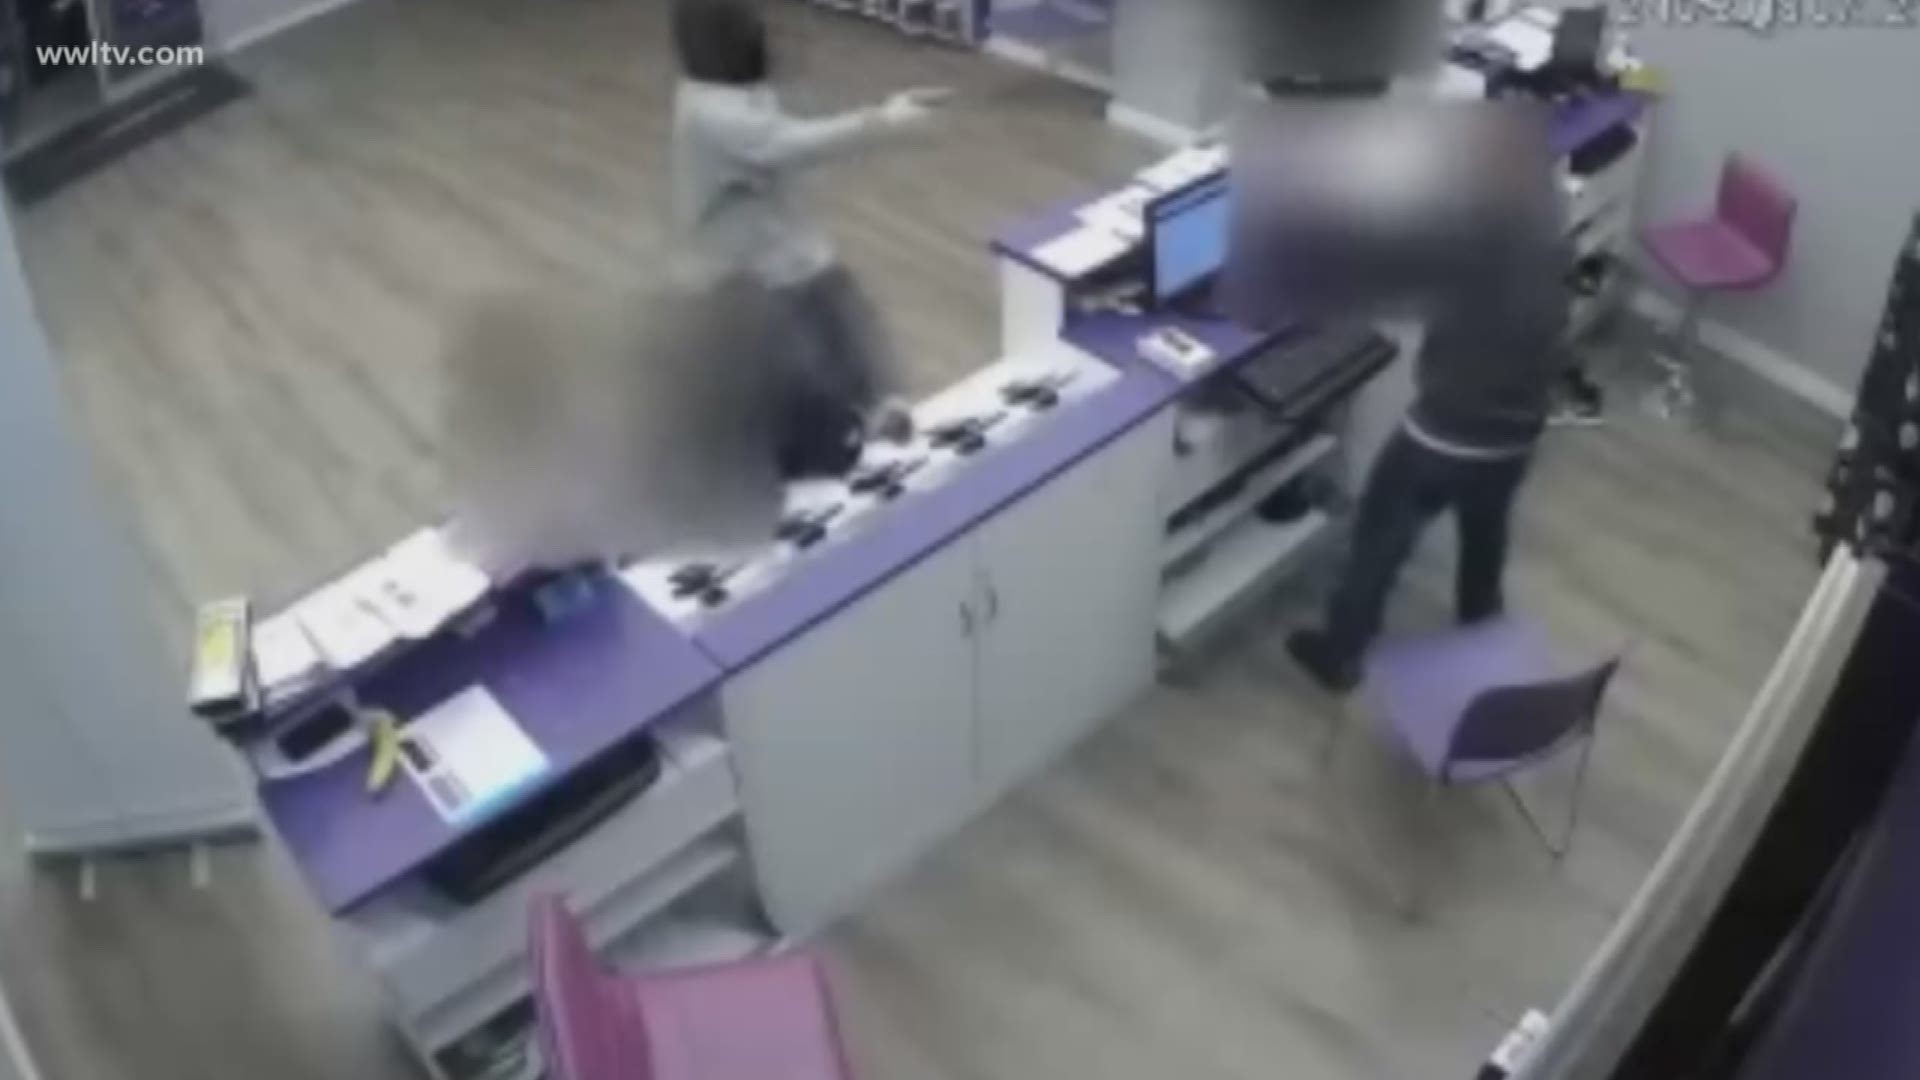 Just a few days apart, a person goes inside of the Laundromat as well as the Metro PCS robbing people inside, and what's worse...there were kids in one of the stores at the time!